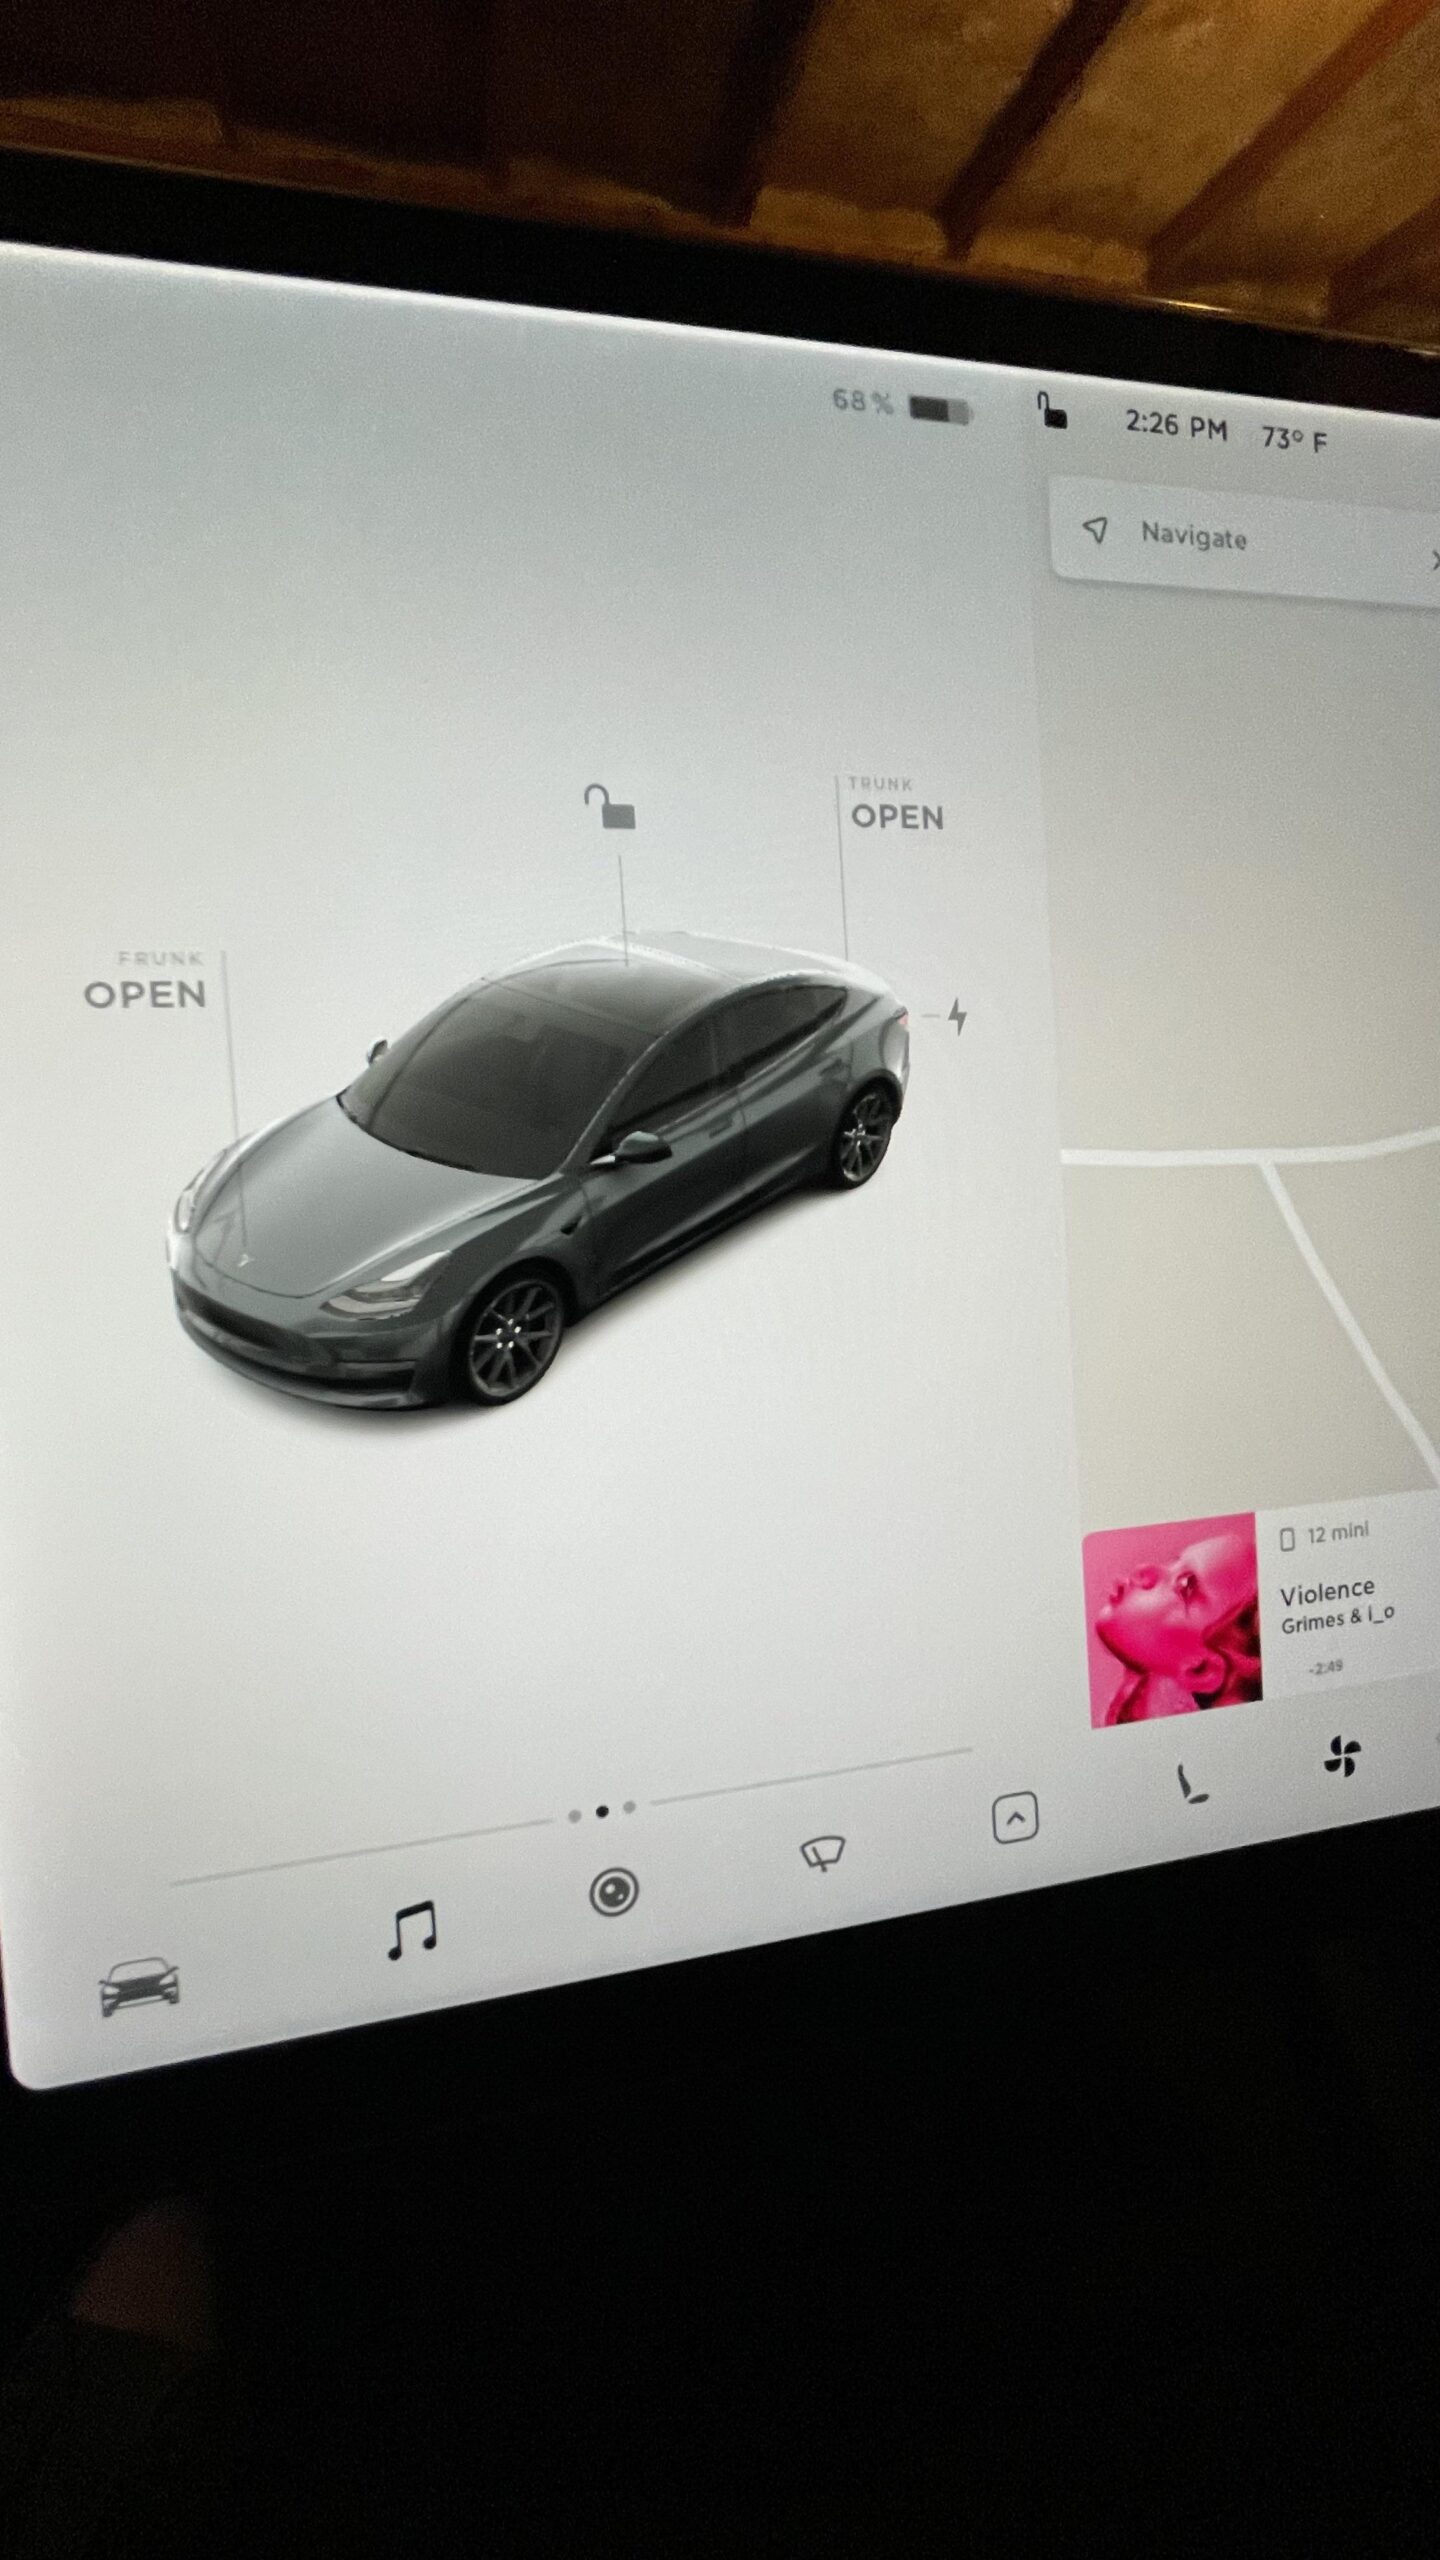 Aero covers can be removed from your screen display – Tesla Model 3 Wiki